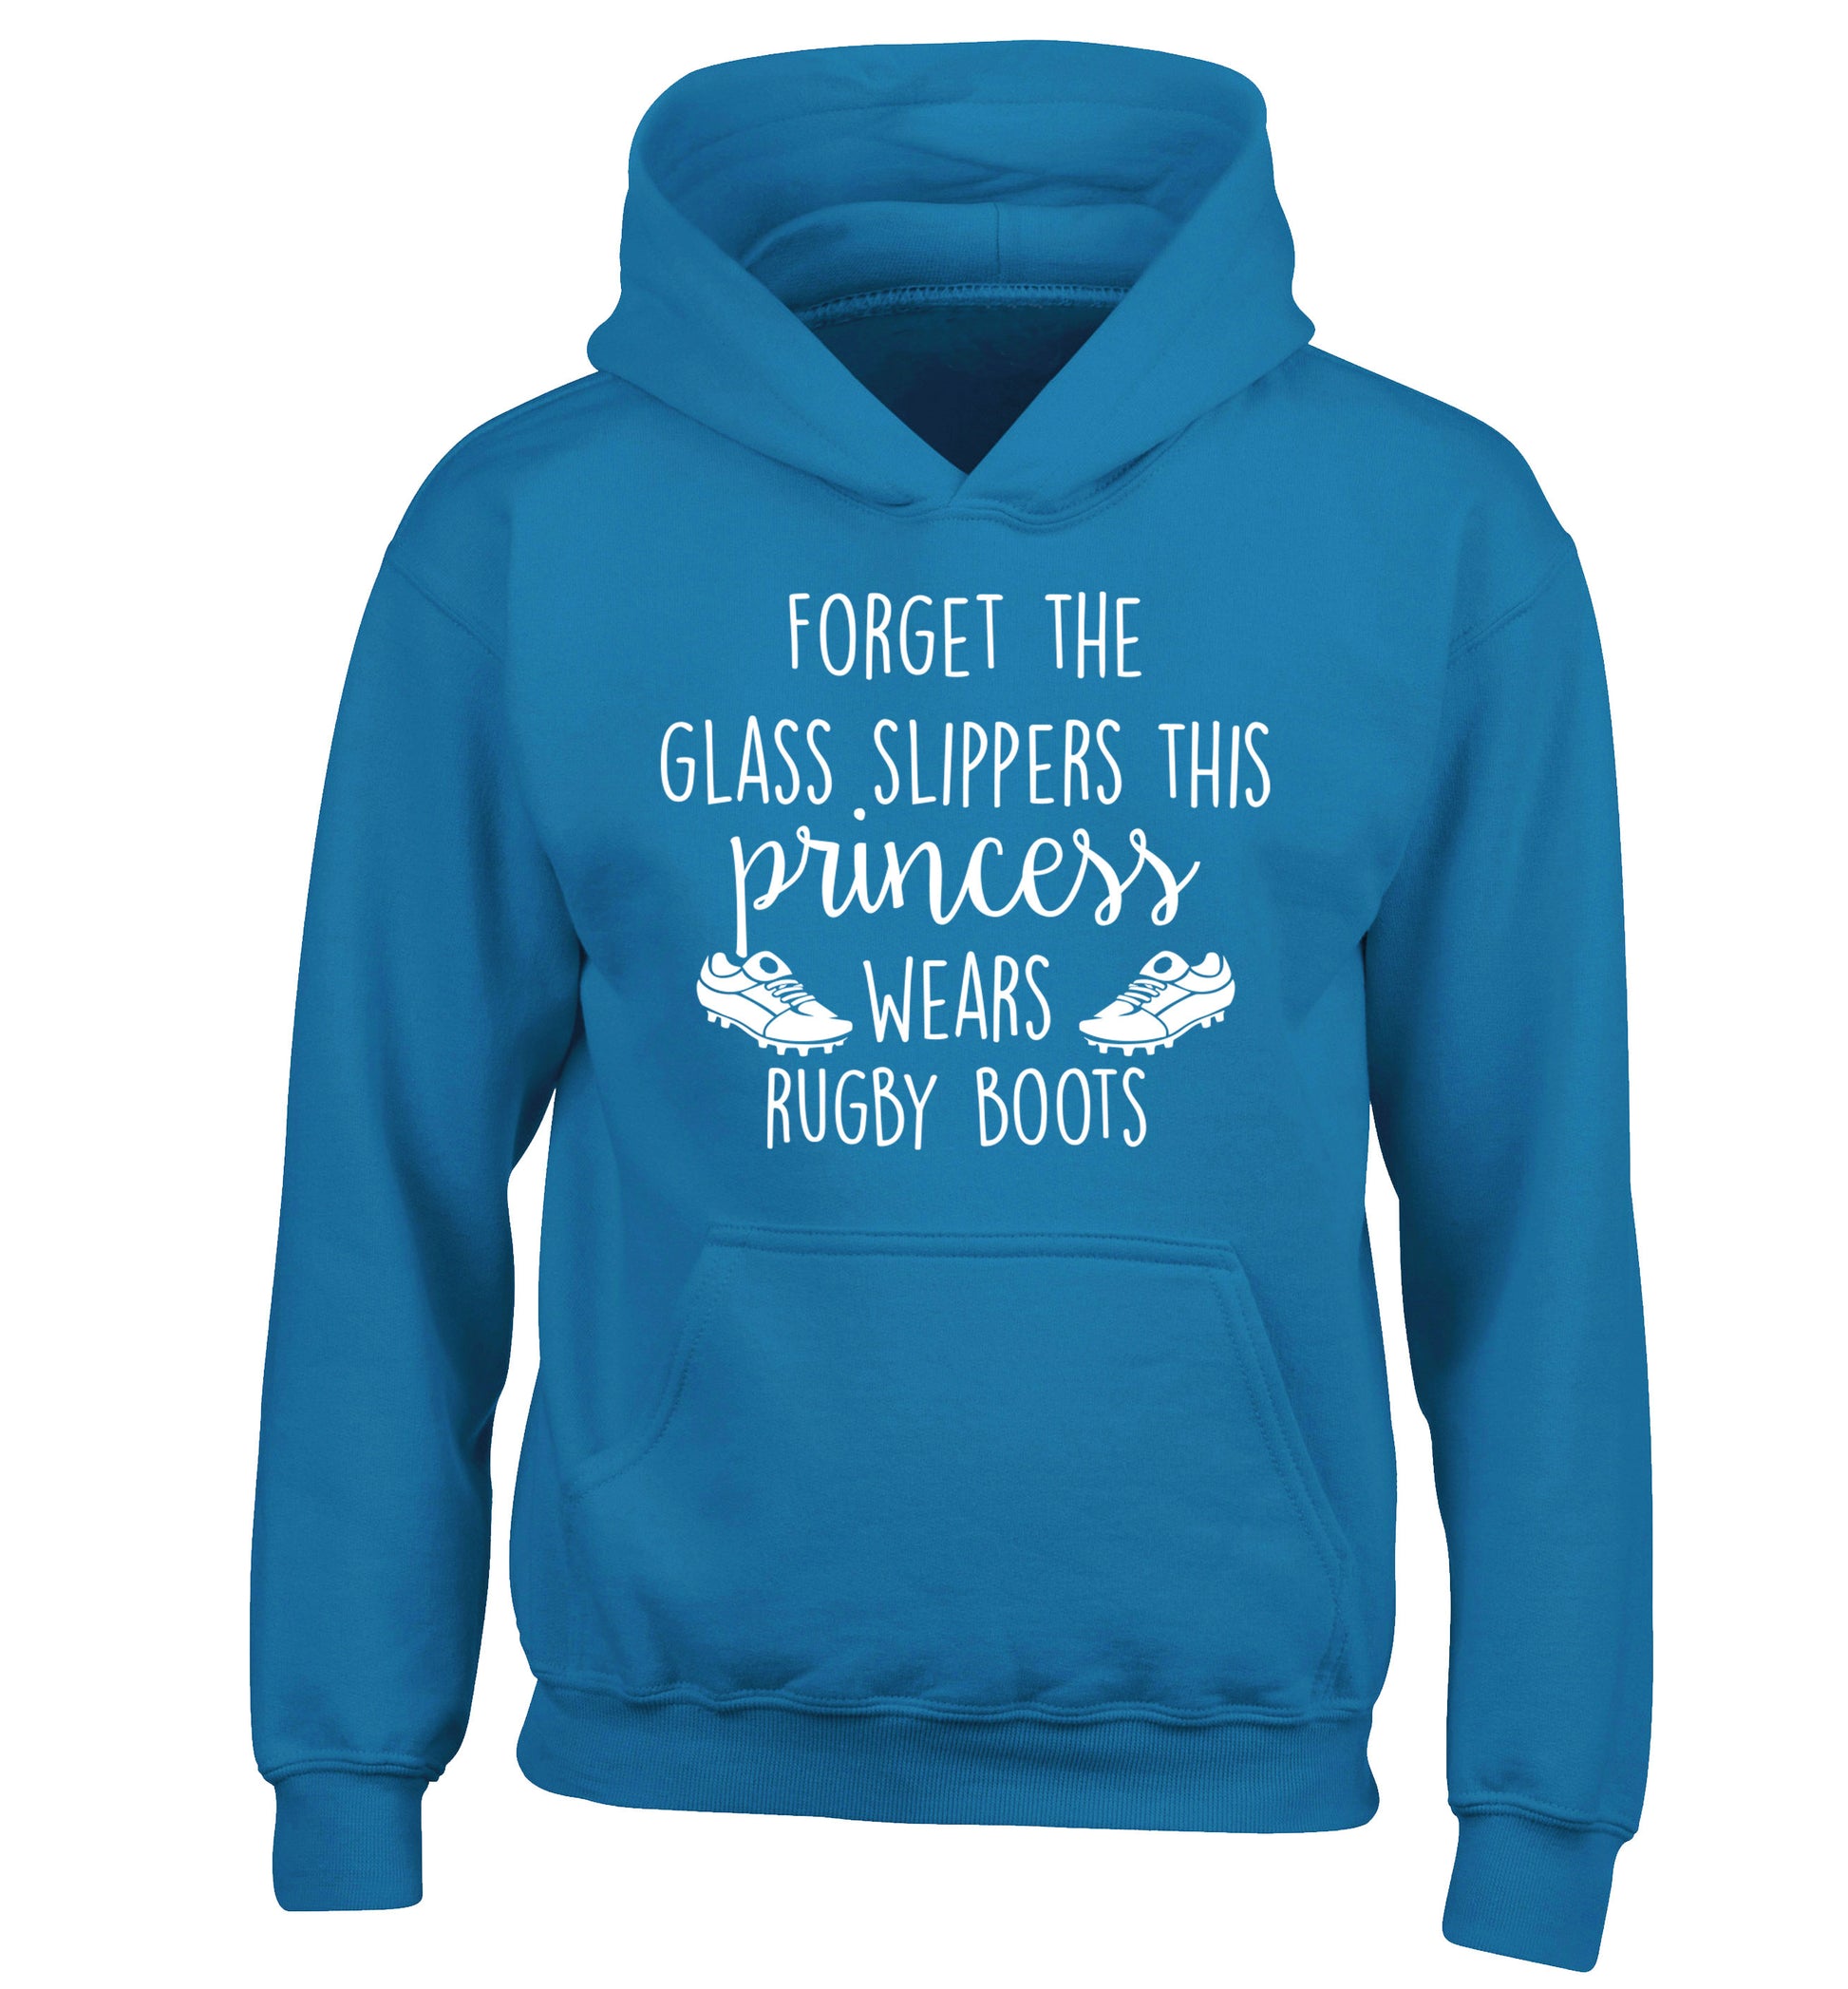 Forget the glass slippers this princess wears rugby boots children's blue hoodie 12-14 Years